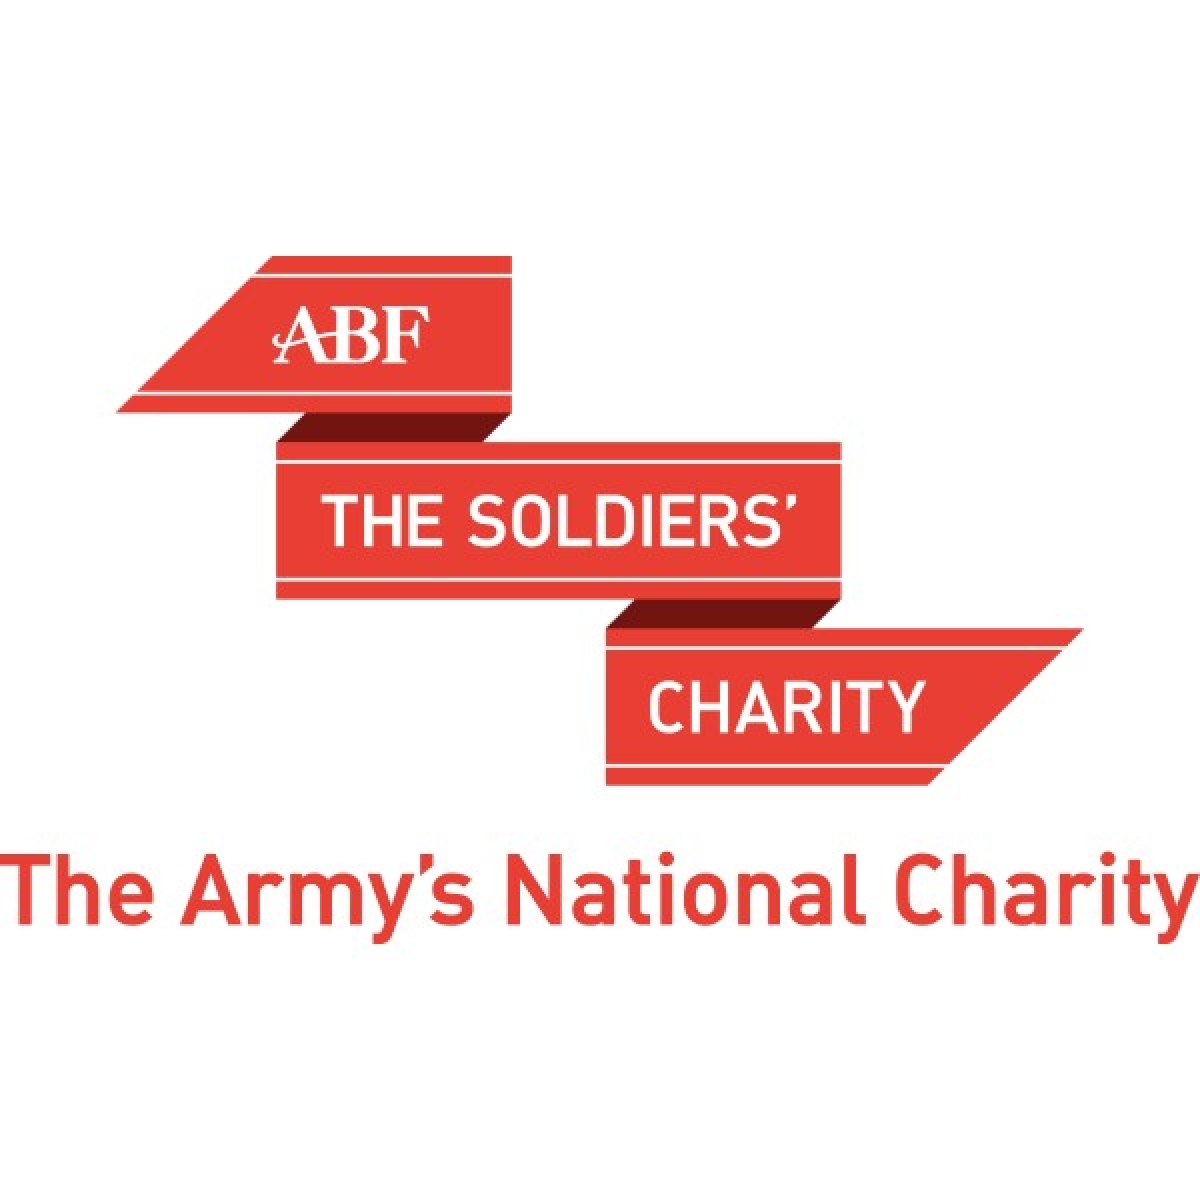 ABF The Soldiers' Charity eCards